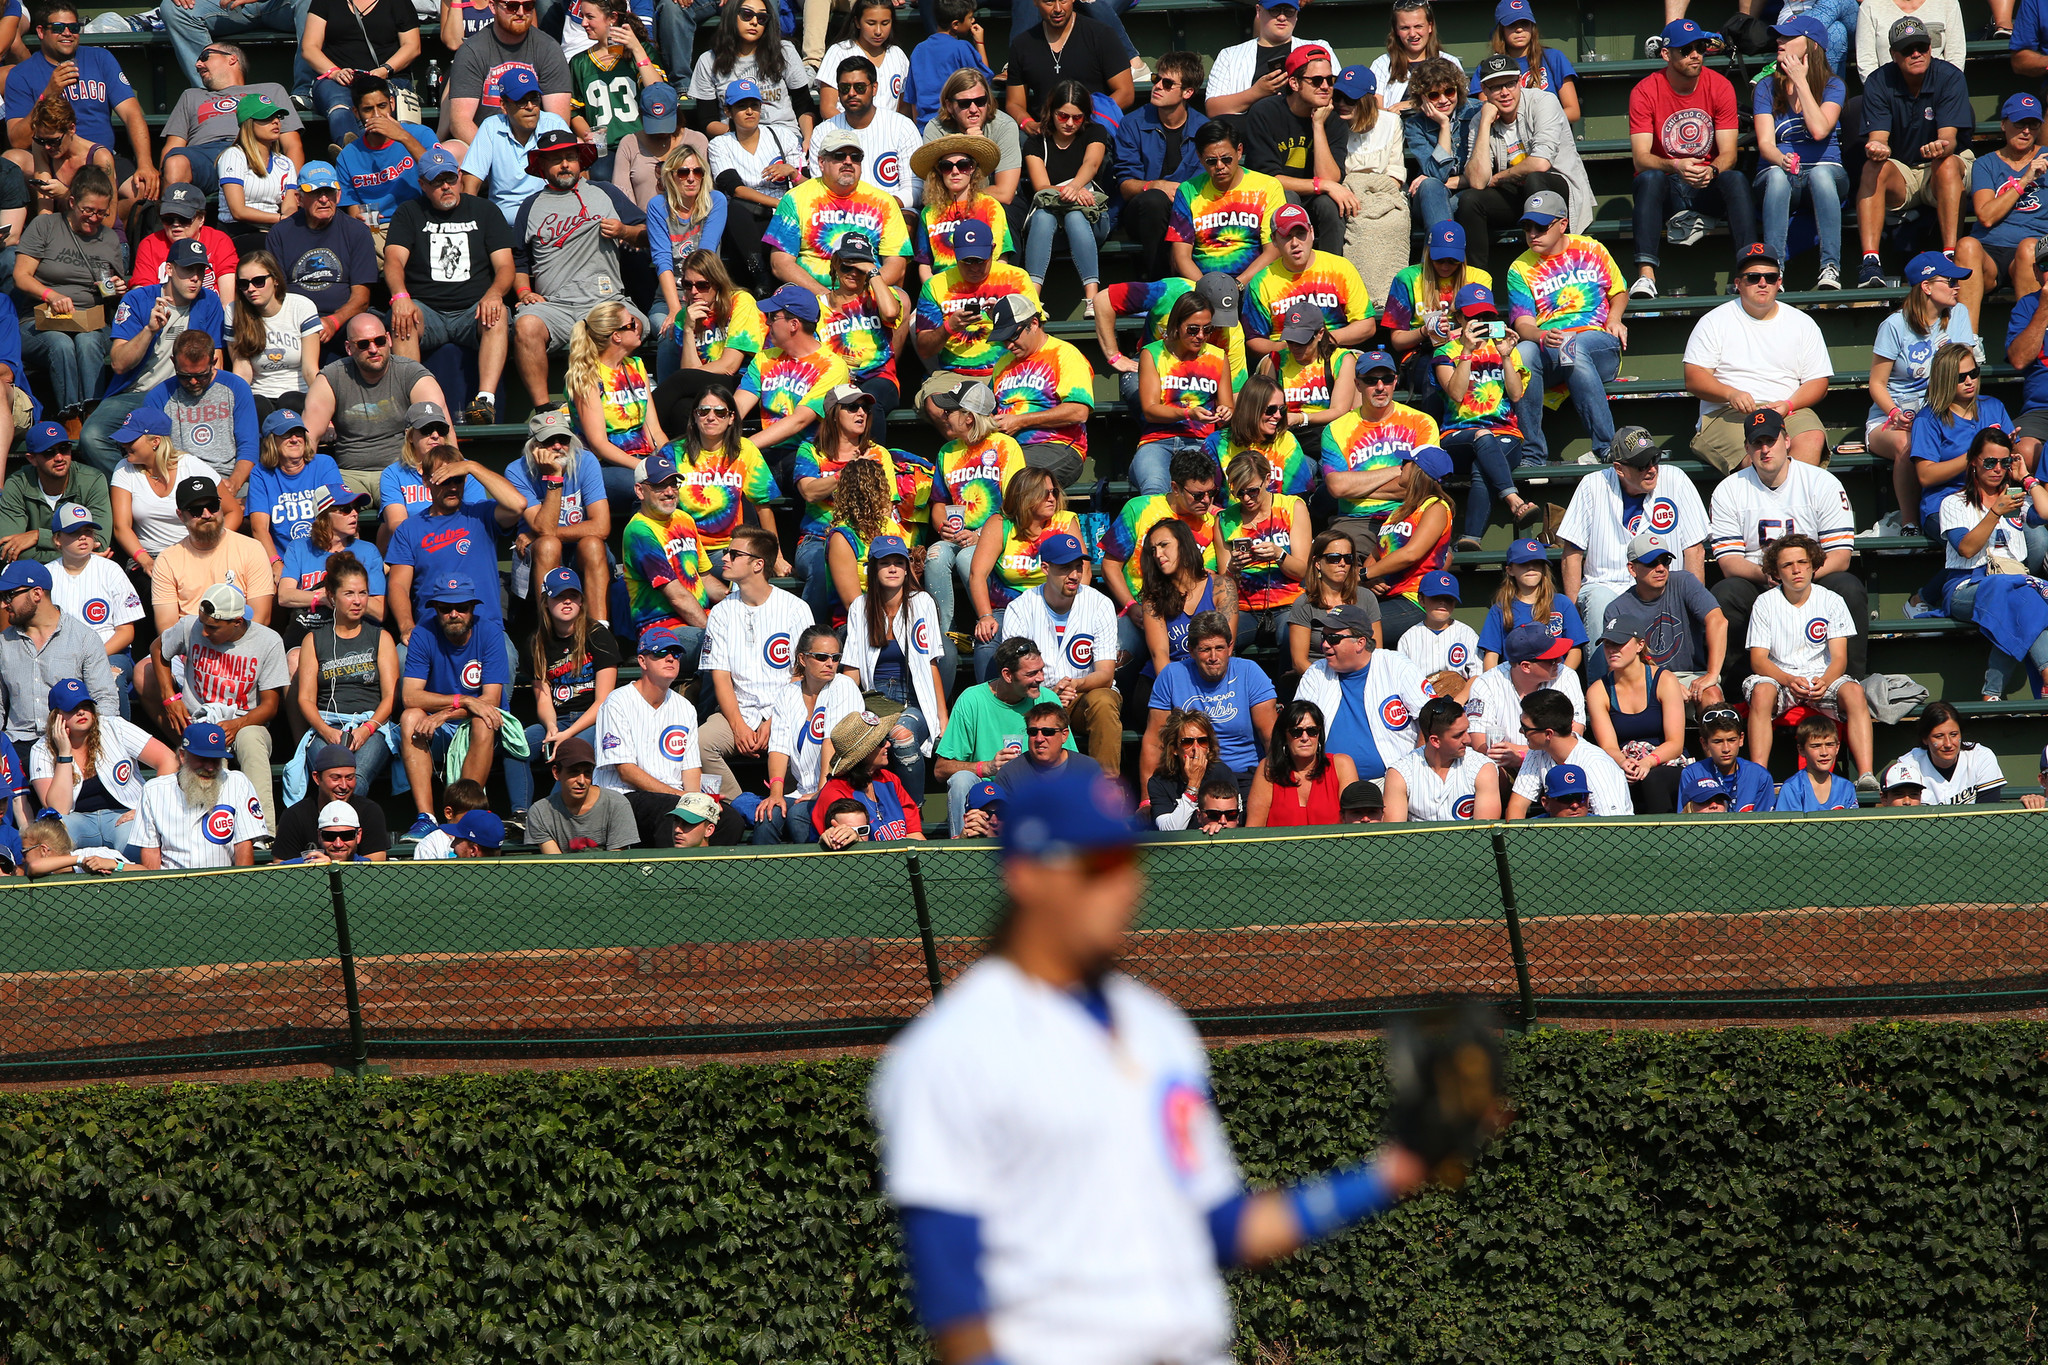 Wrigley bleachers have changed, but it's still great place to watch game - Chicago Tribune